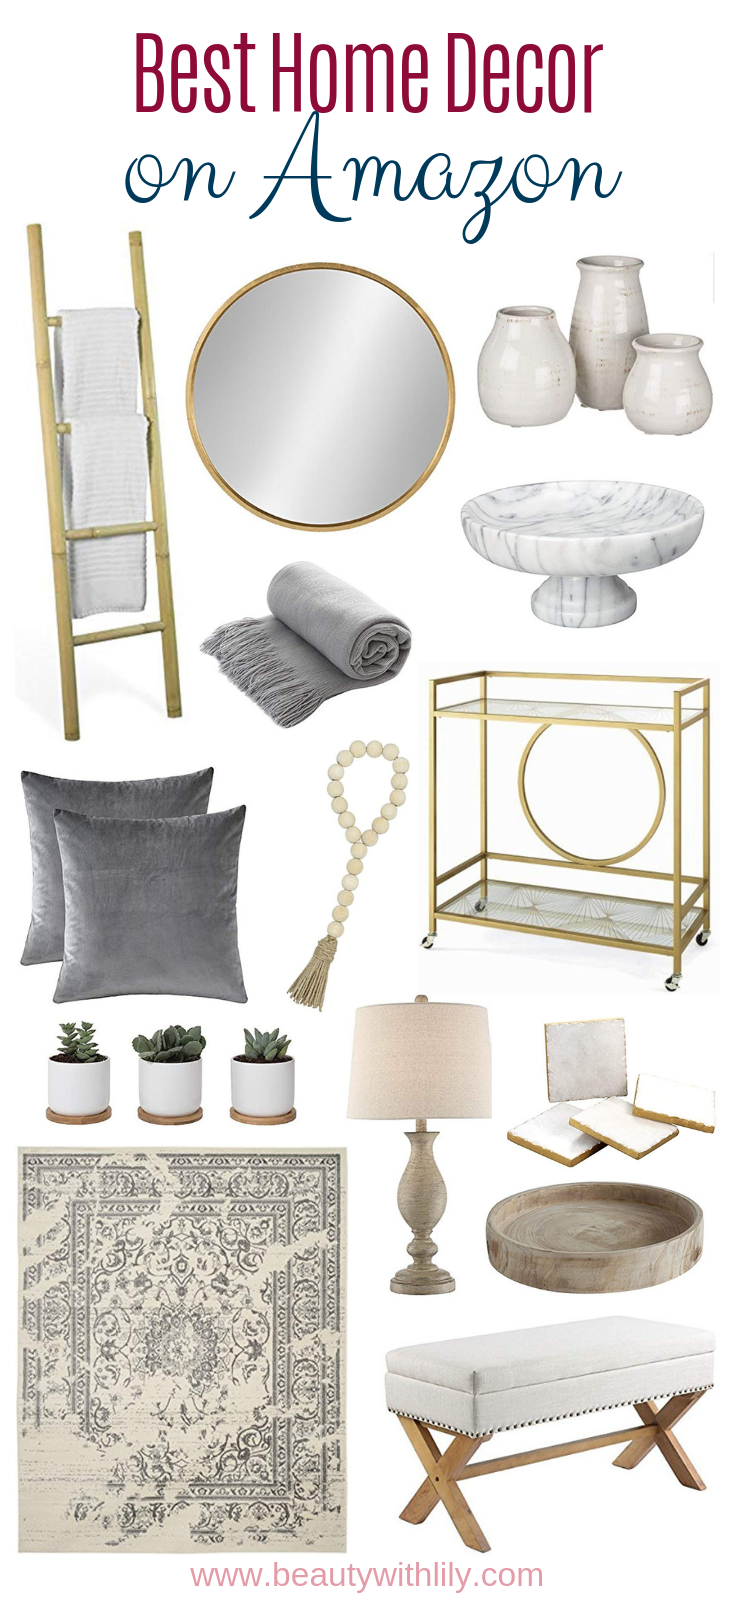 Best Home Decor Items On Amazon // Amazon Home Decor // Affordable Home Decor // Home Decor Ideas // Modern Farmhouse Home Decor // Glam Farmhouse Home Decor | Beauty With Lily 